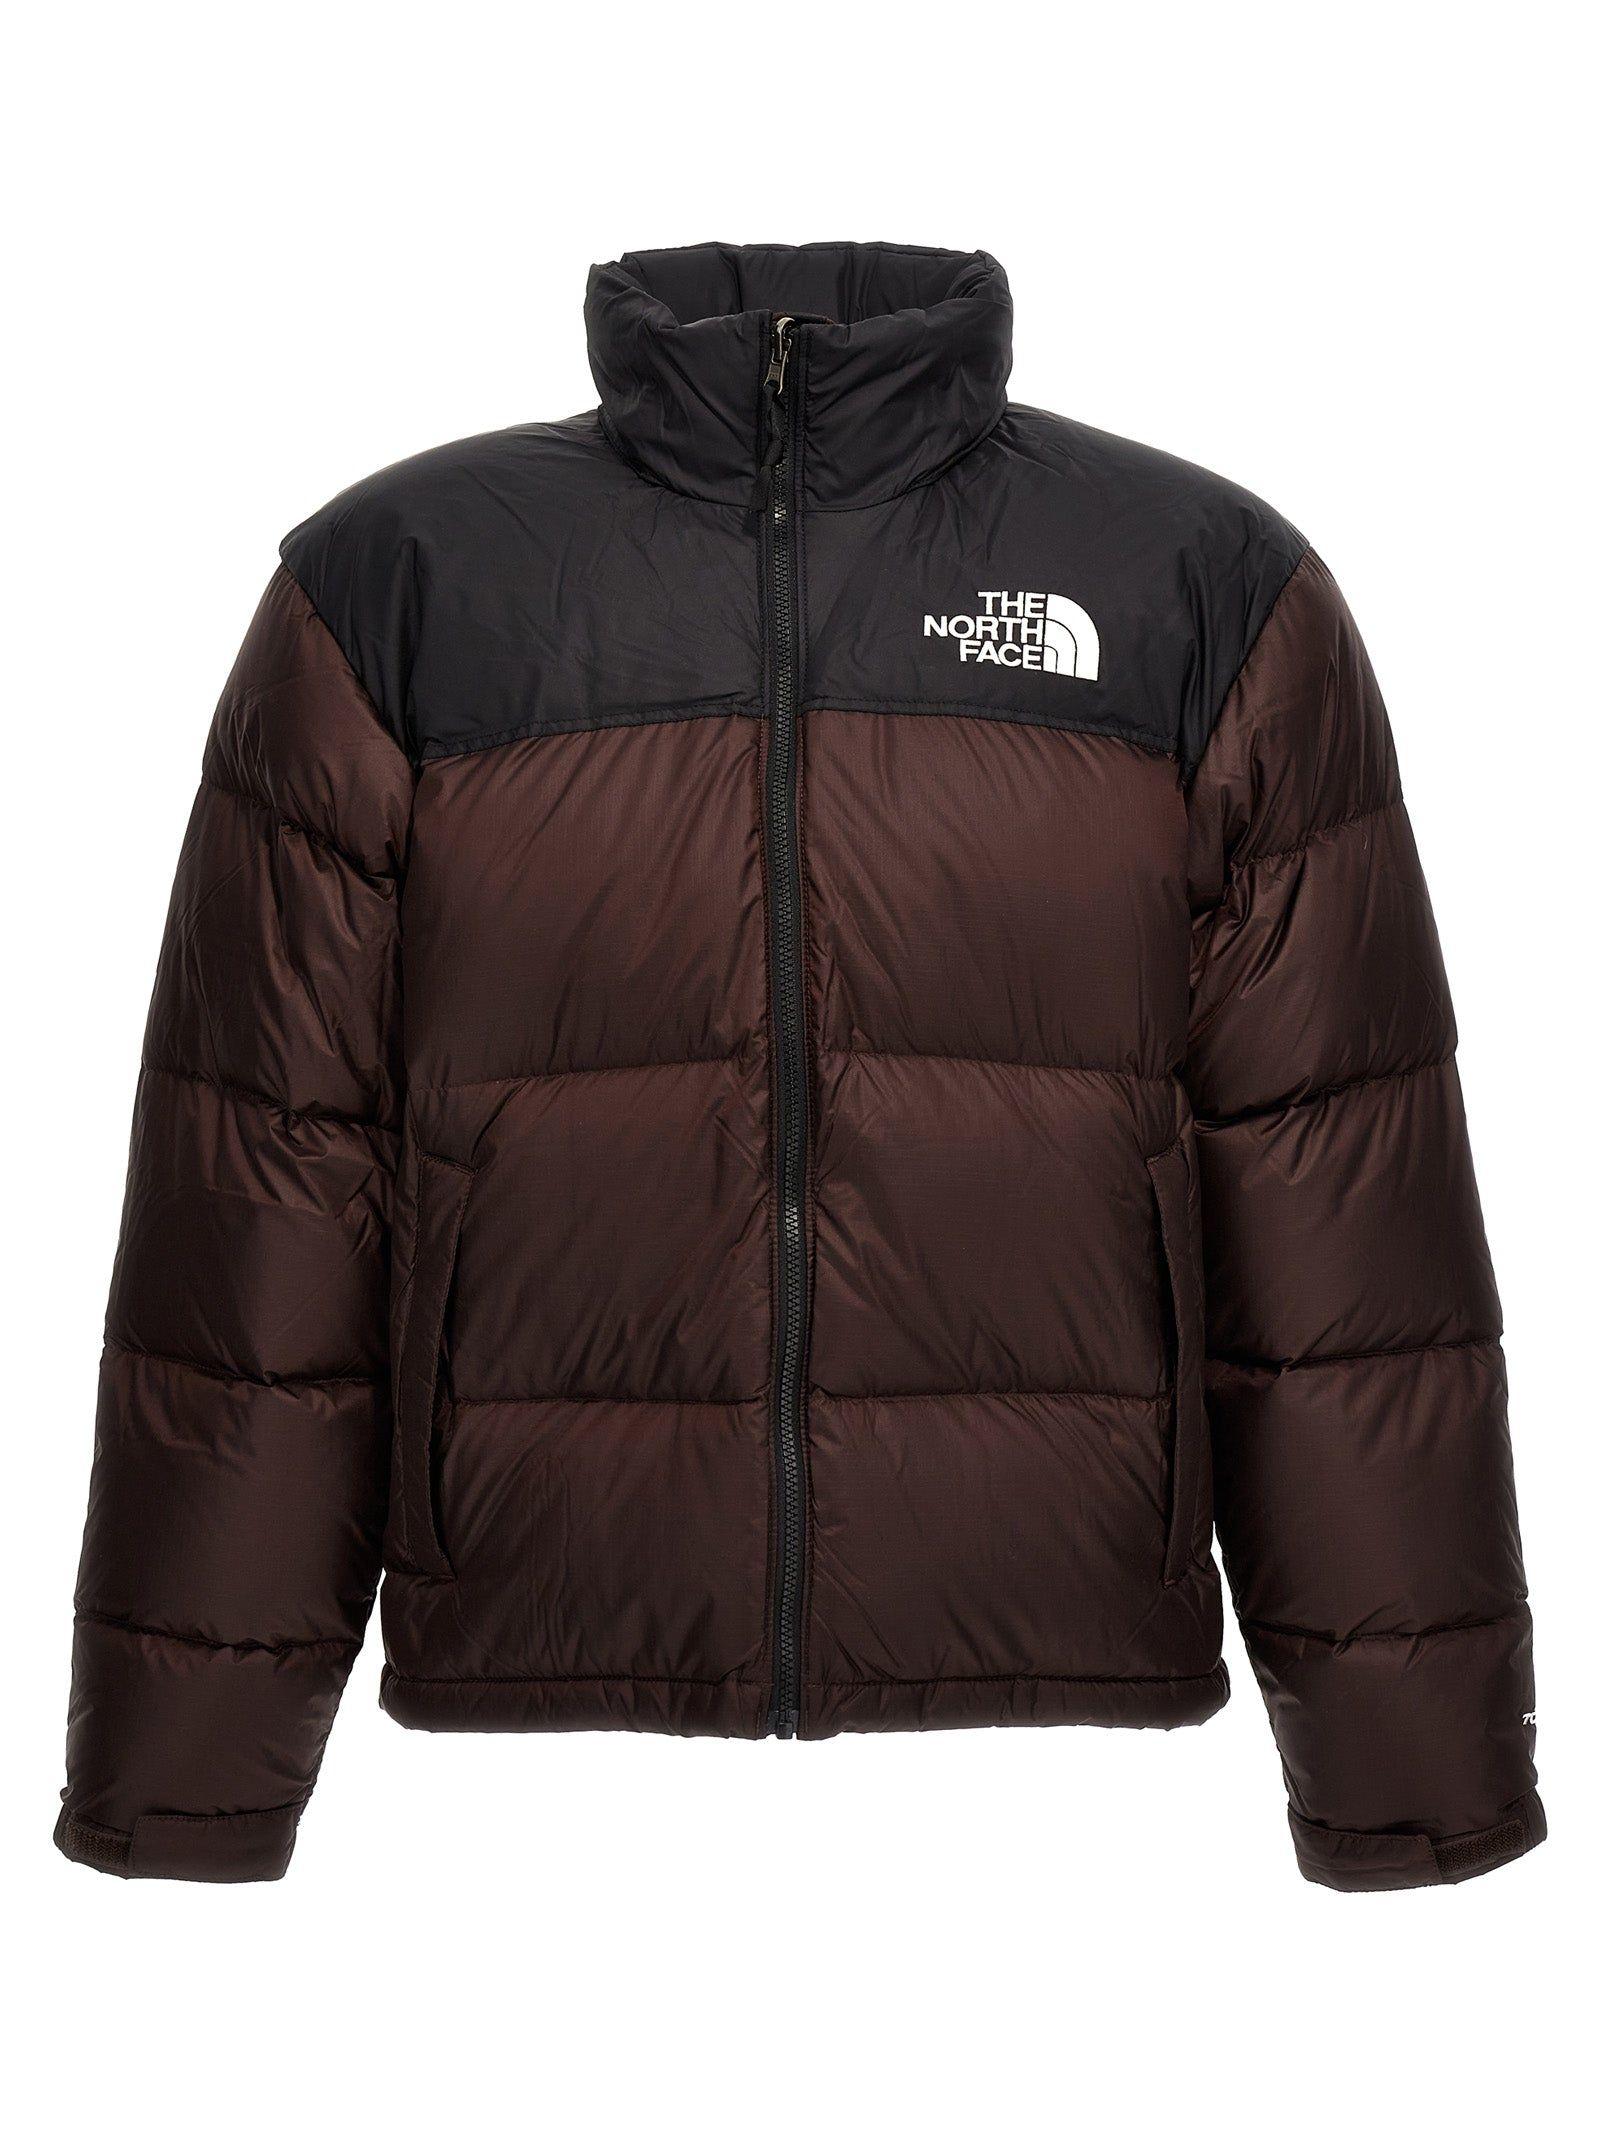 The North Face 1996 Retro Nuptse Ripstop Down Jacket in Brown for